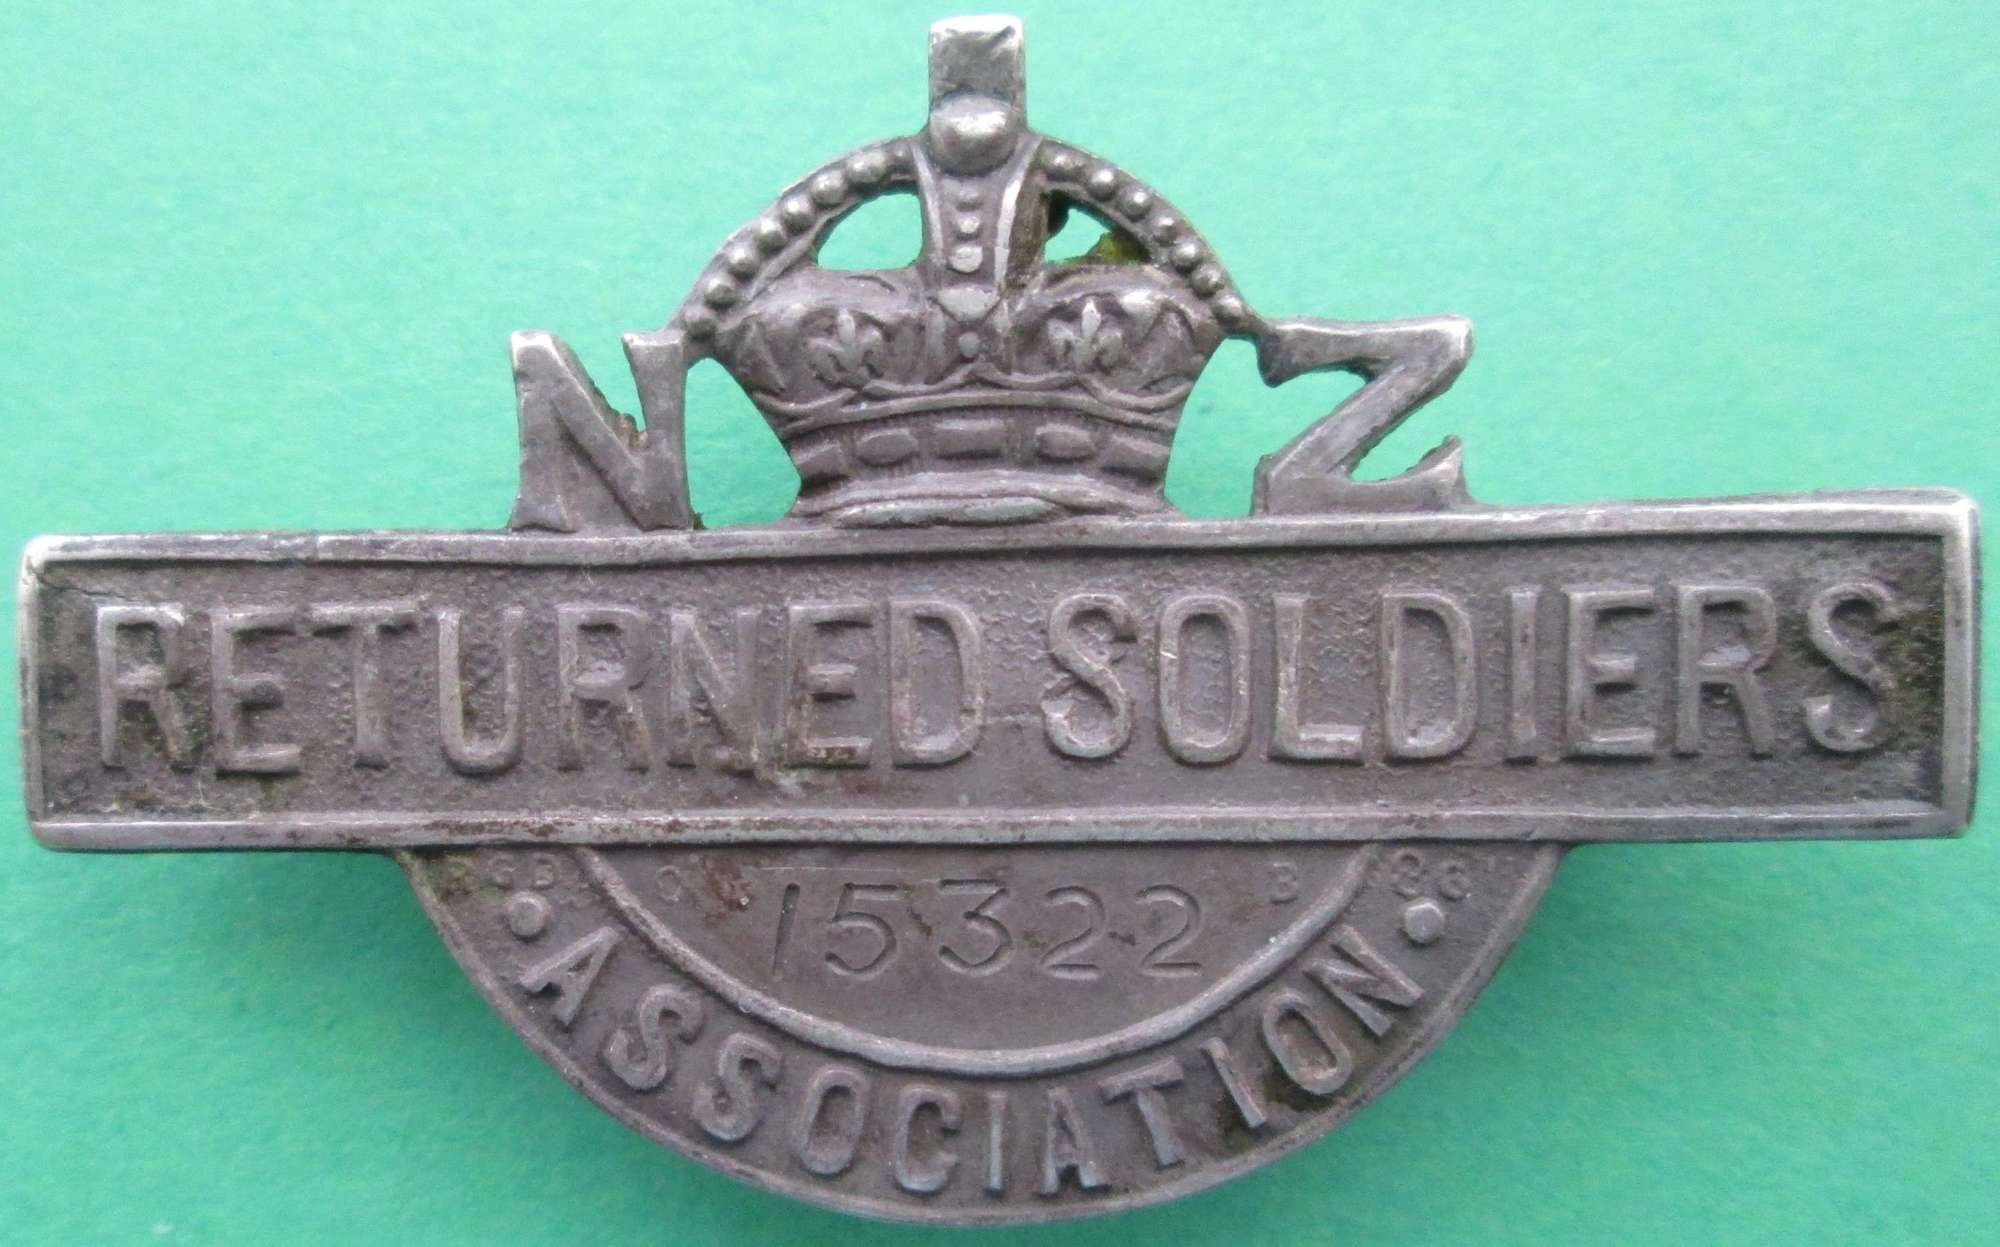 WWI RETURNED SOLDIERS ASSOCIATION PIN BADGE